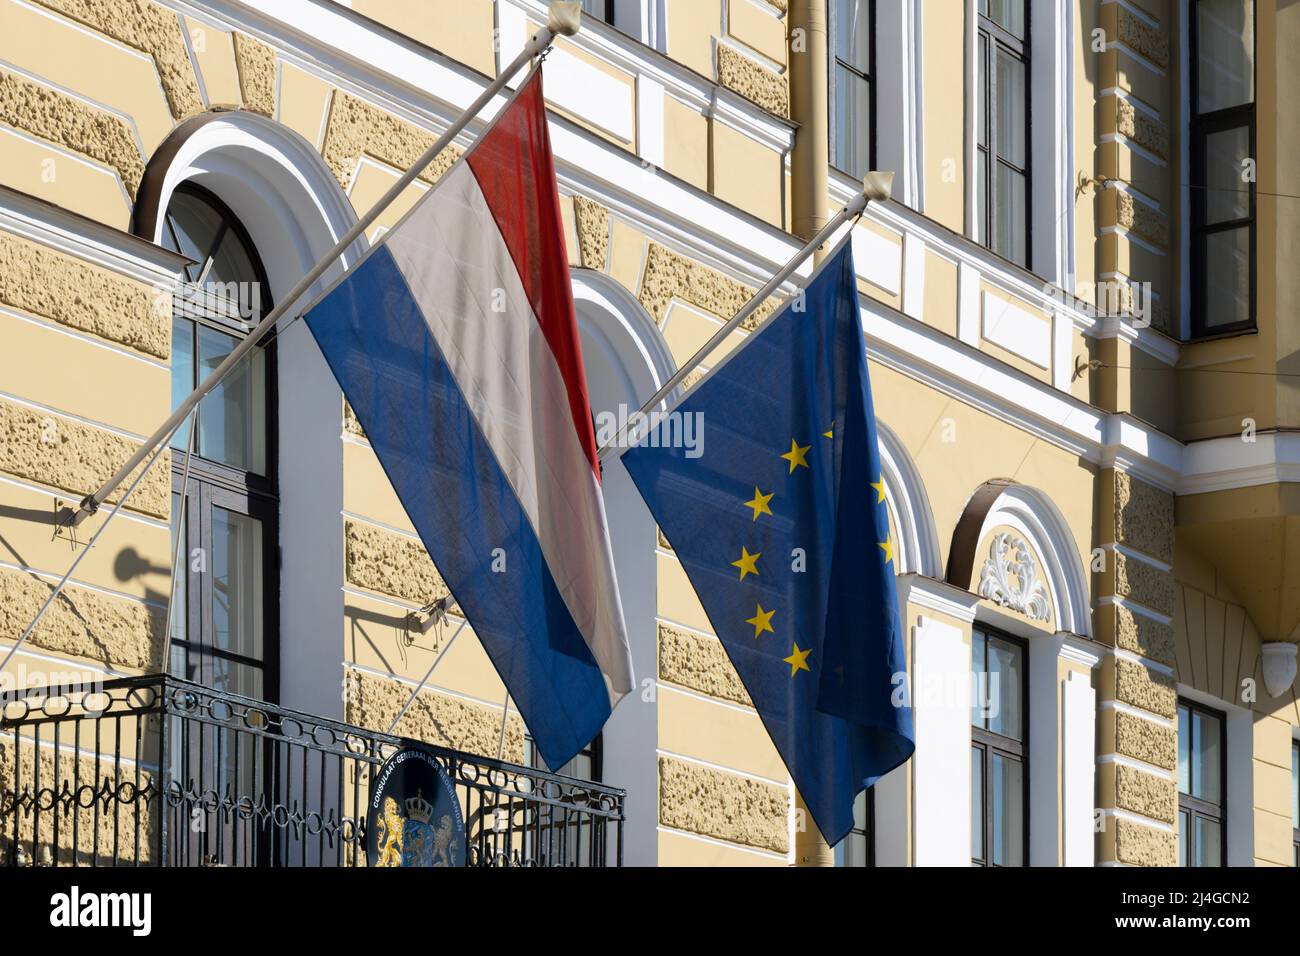 Flags of the European Union and the Netherlands hang on the facade of the embassy building Stock Photo